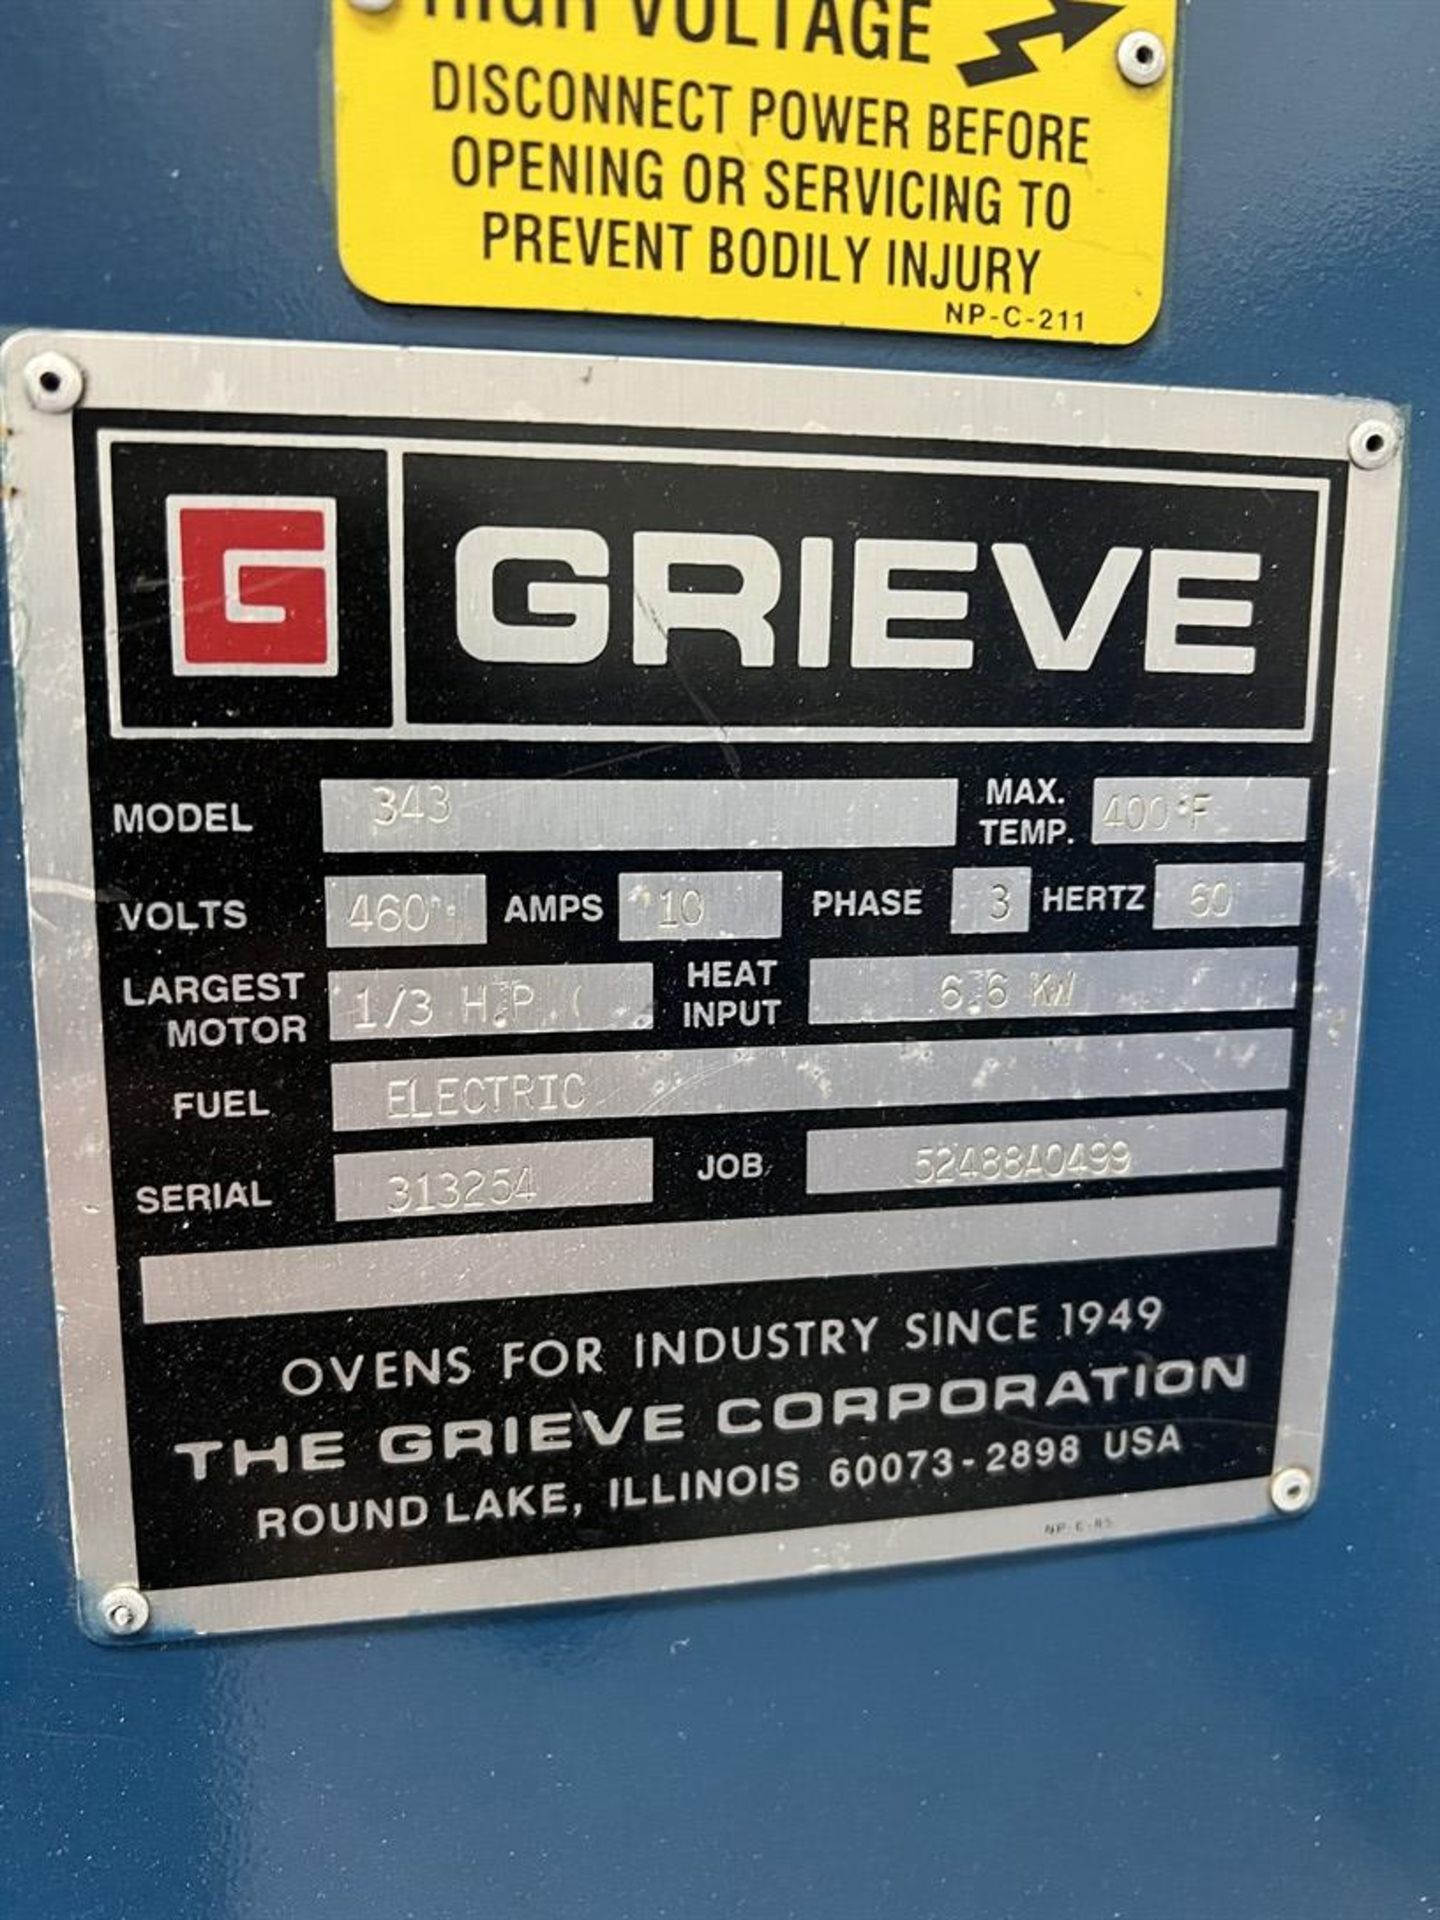 GRIEVE No 343 Oven, s/n 313254, w/ 36”x 48”x 36” Chamber, 36 Cu. Ft. Volume, 400 deg. F - Image 5 of 6